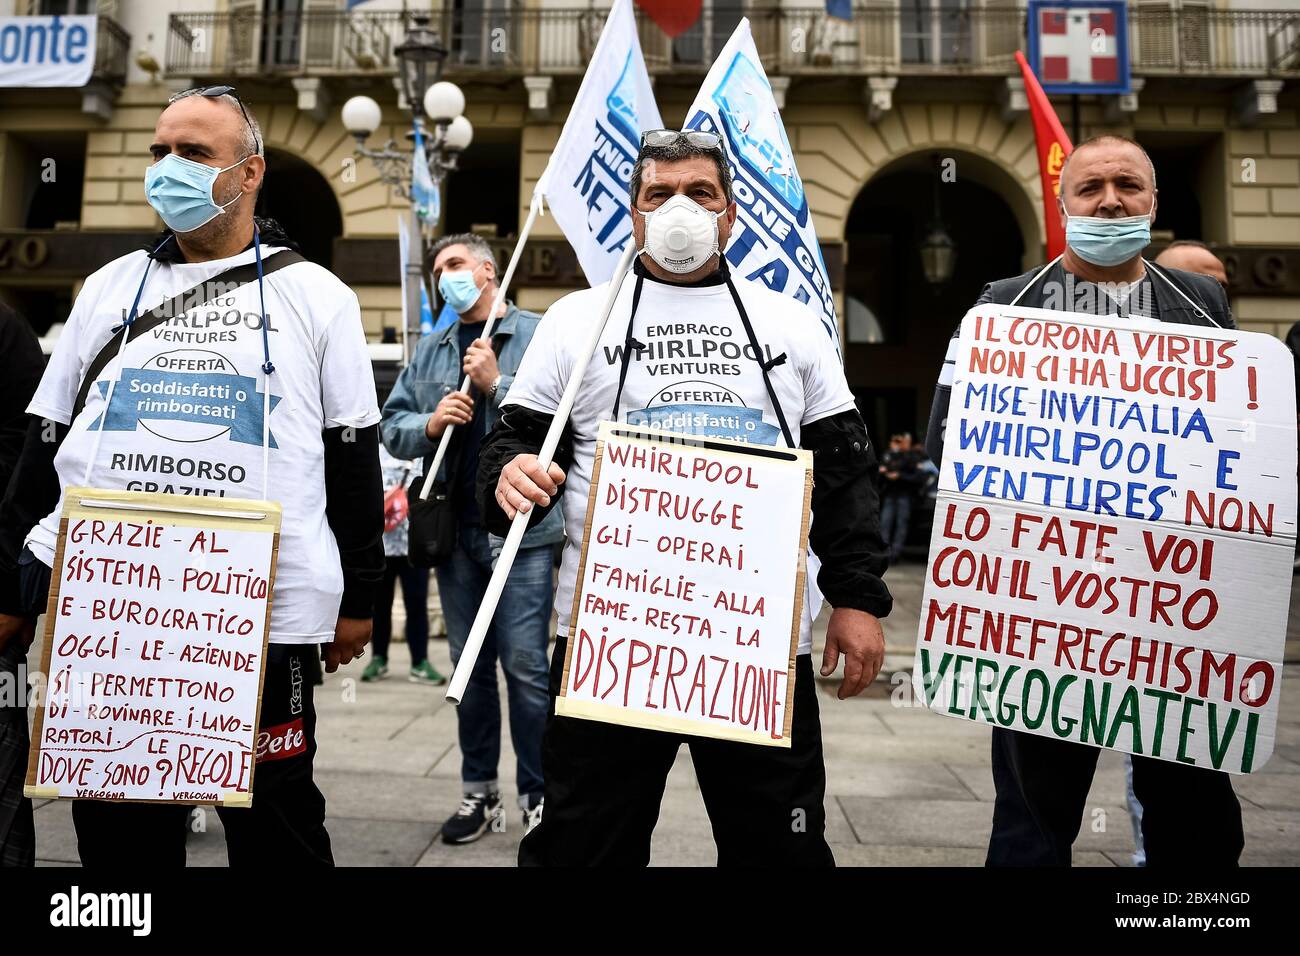 Turin, Italy - 04 June, 2020: Protesters hold placards against Whirlpool and Ventures during a protest by former Embraco workers (Whirlpool group) who complain of unpaid back wages from Ventures. Whirlpool selled Riva di Chieri plant to Ventures on July 2018. Credit: Nicolò Campo/Alamy Live News Stock Photo